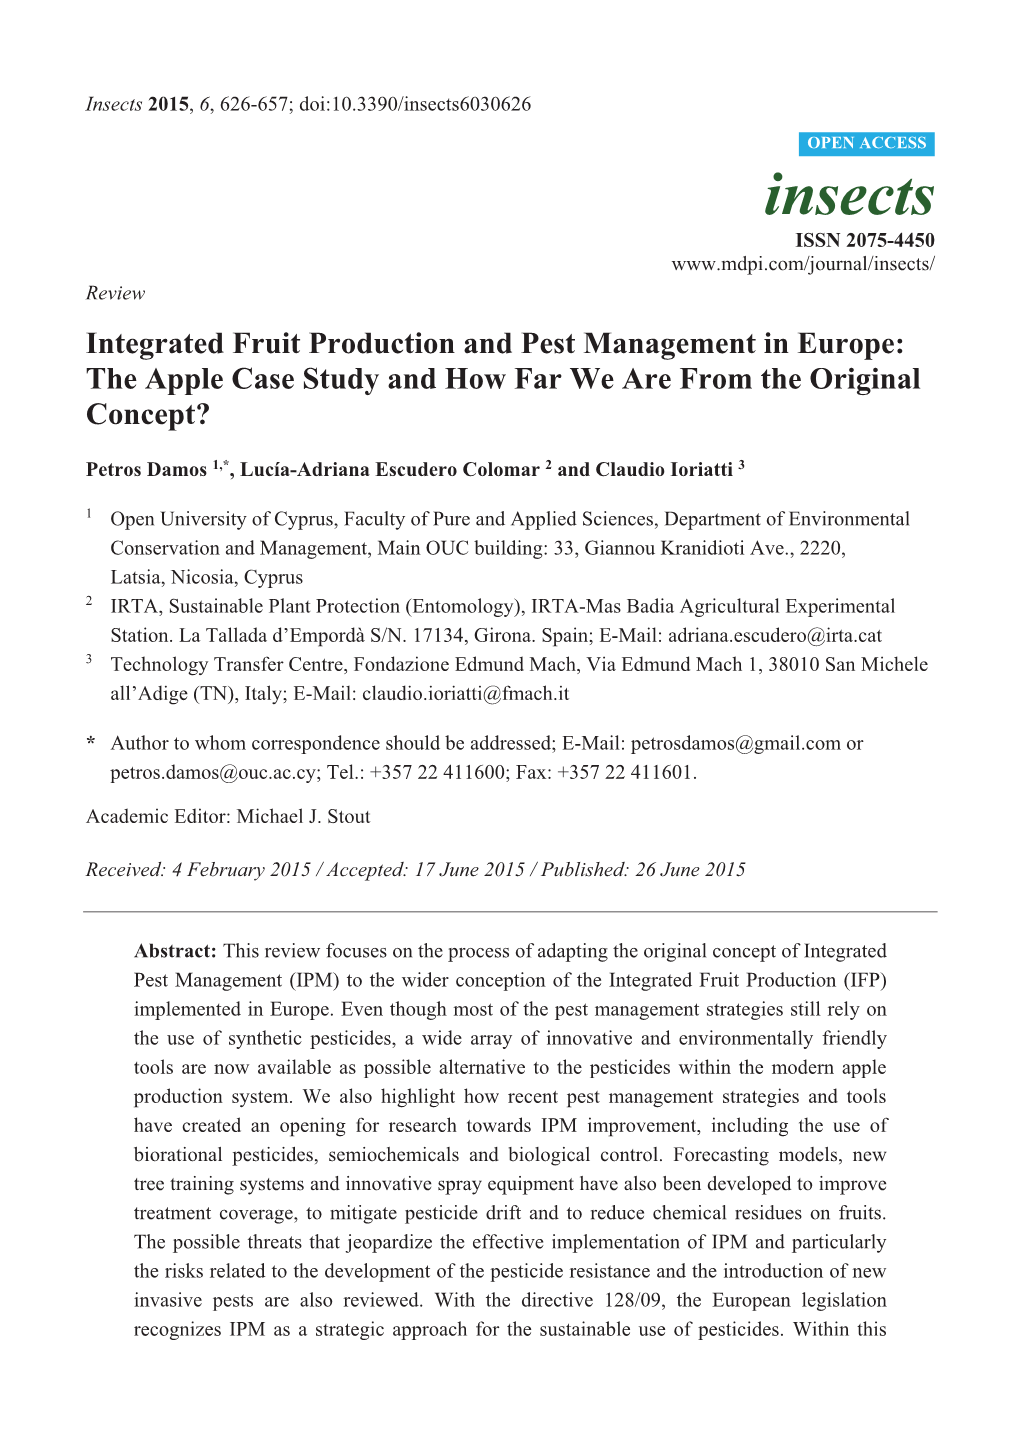 Integrated Fruit Production and Pest Management in Europe: the Apple Case Study and How Far We Are from the Original Concept?